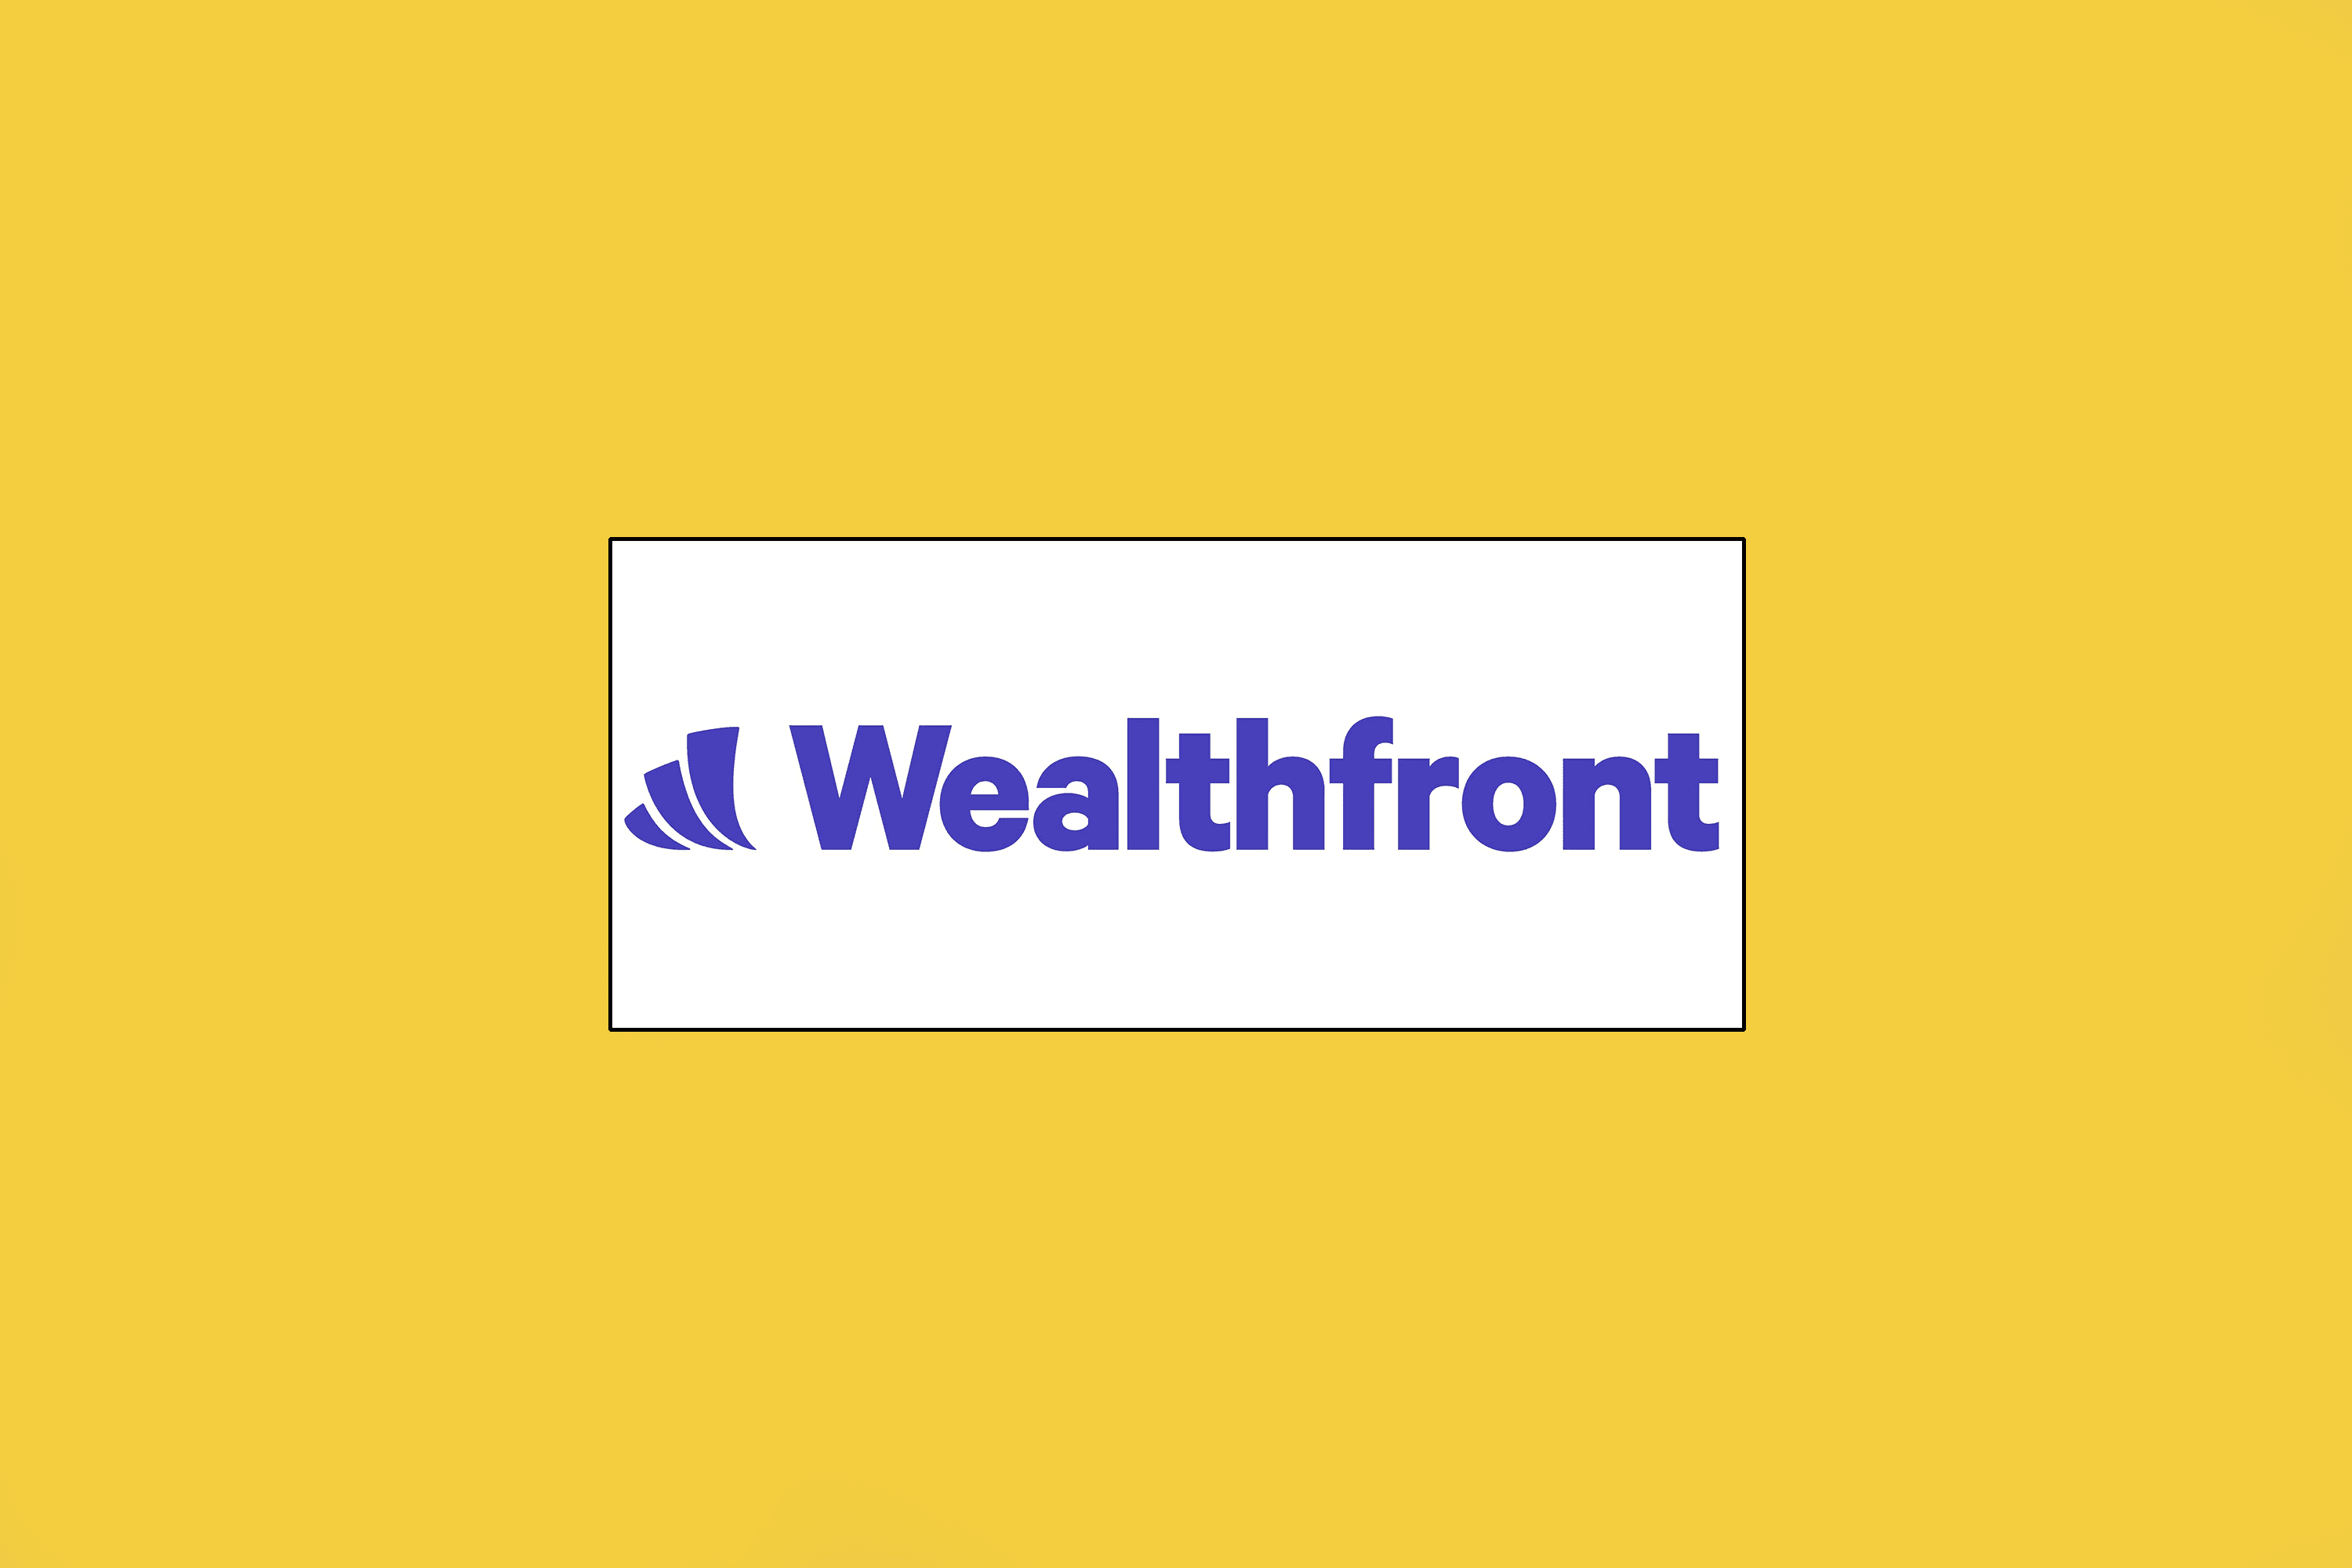 Image shows Wealthfront logo in the center of a yellow background.